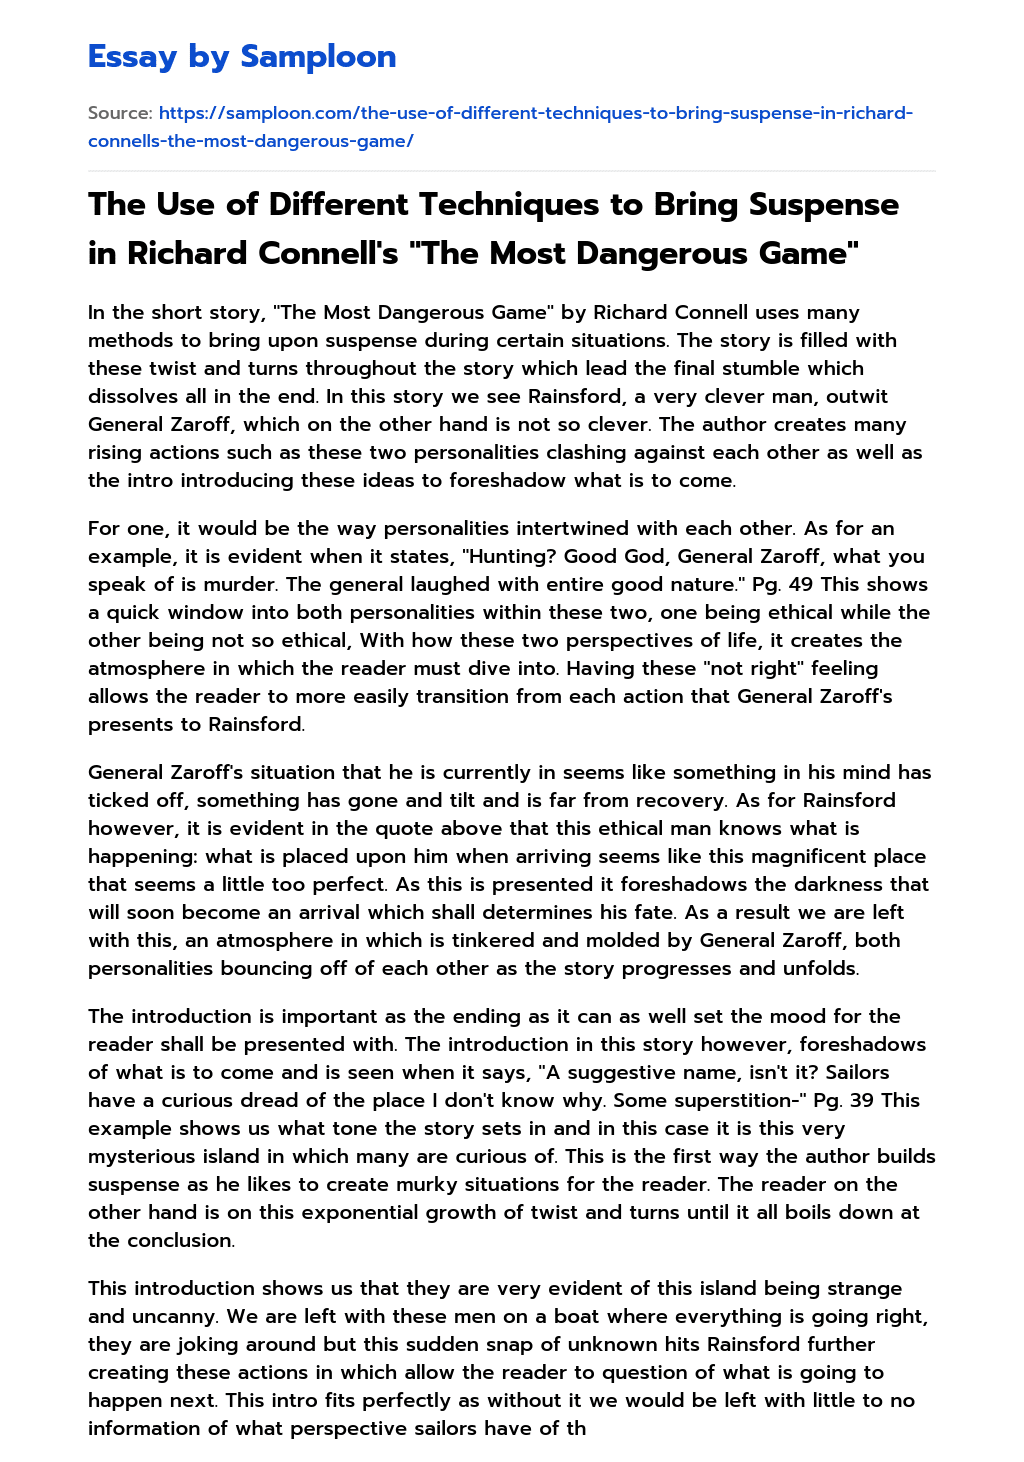 The Use of Different Techniques to Bring Suspense in Richard Connell’s “The Most Dangerous Game” essay